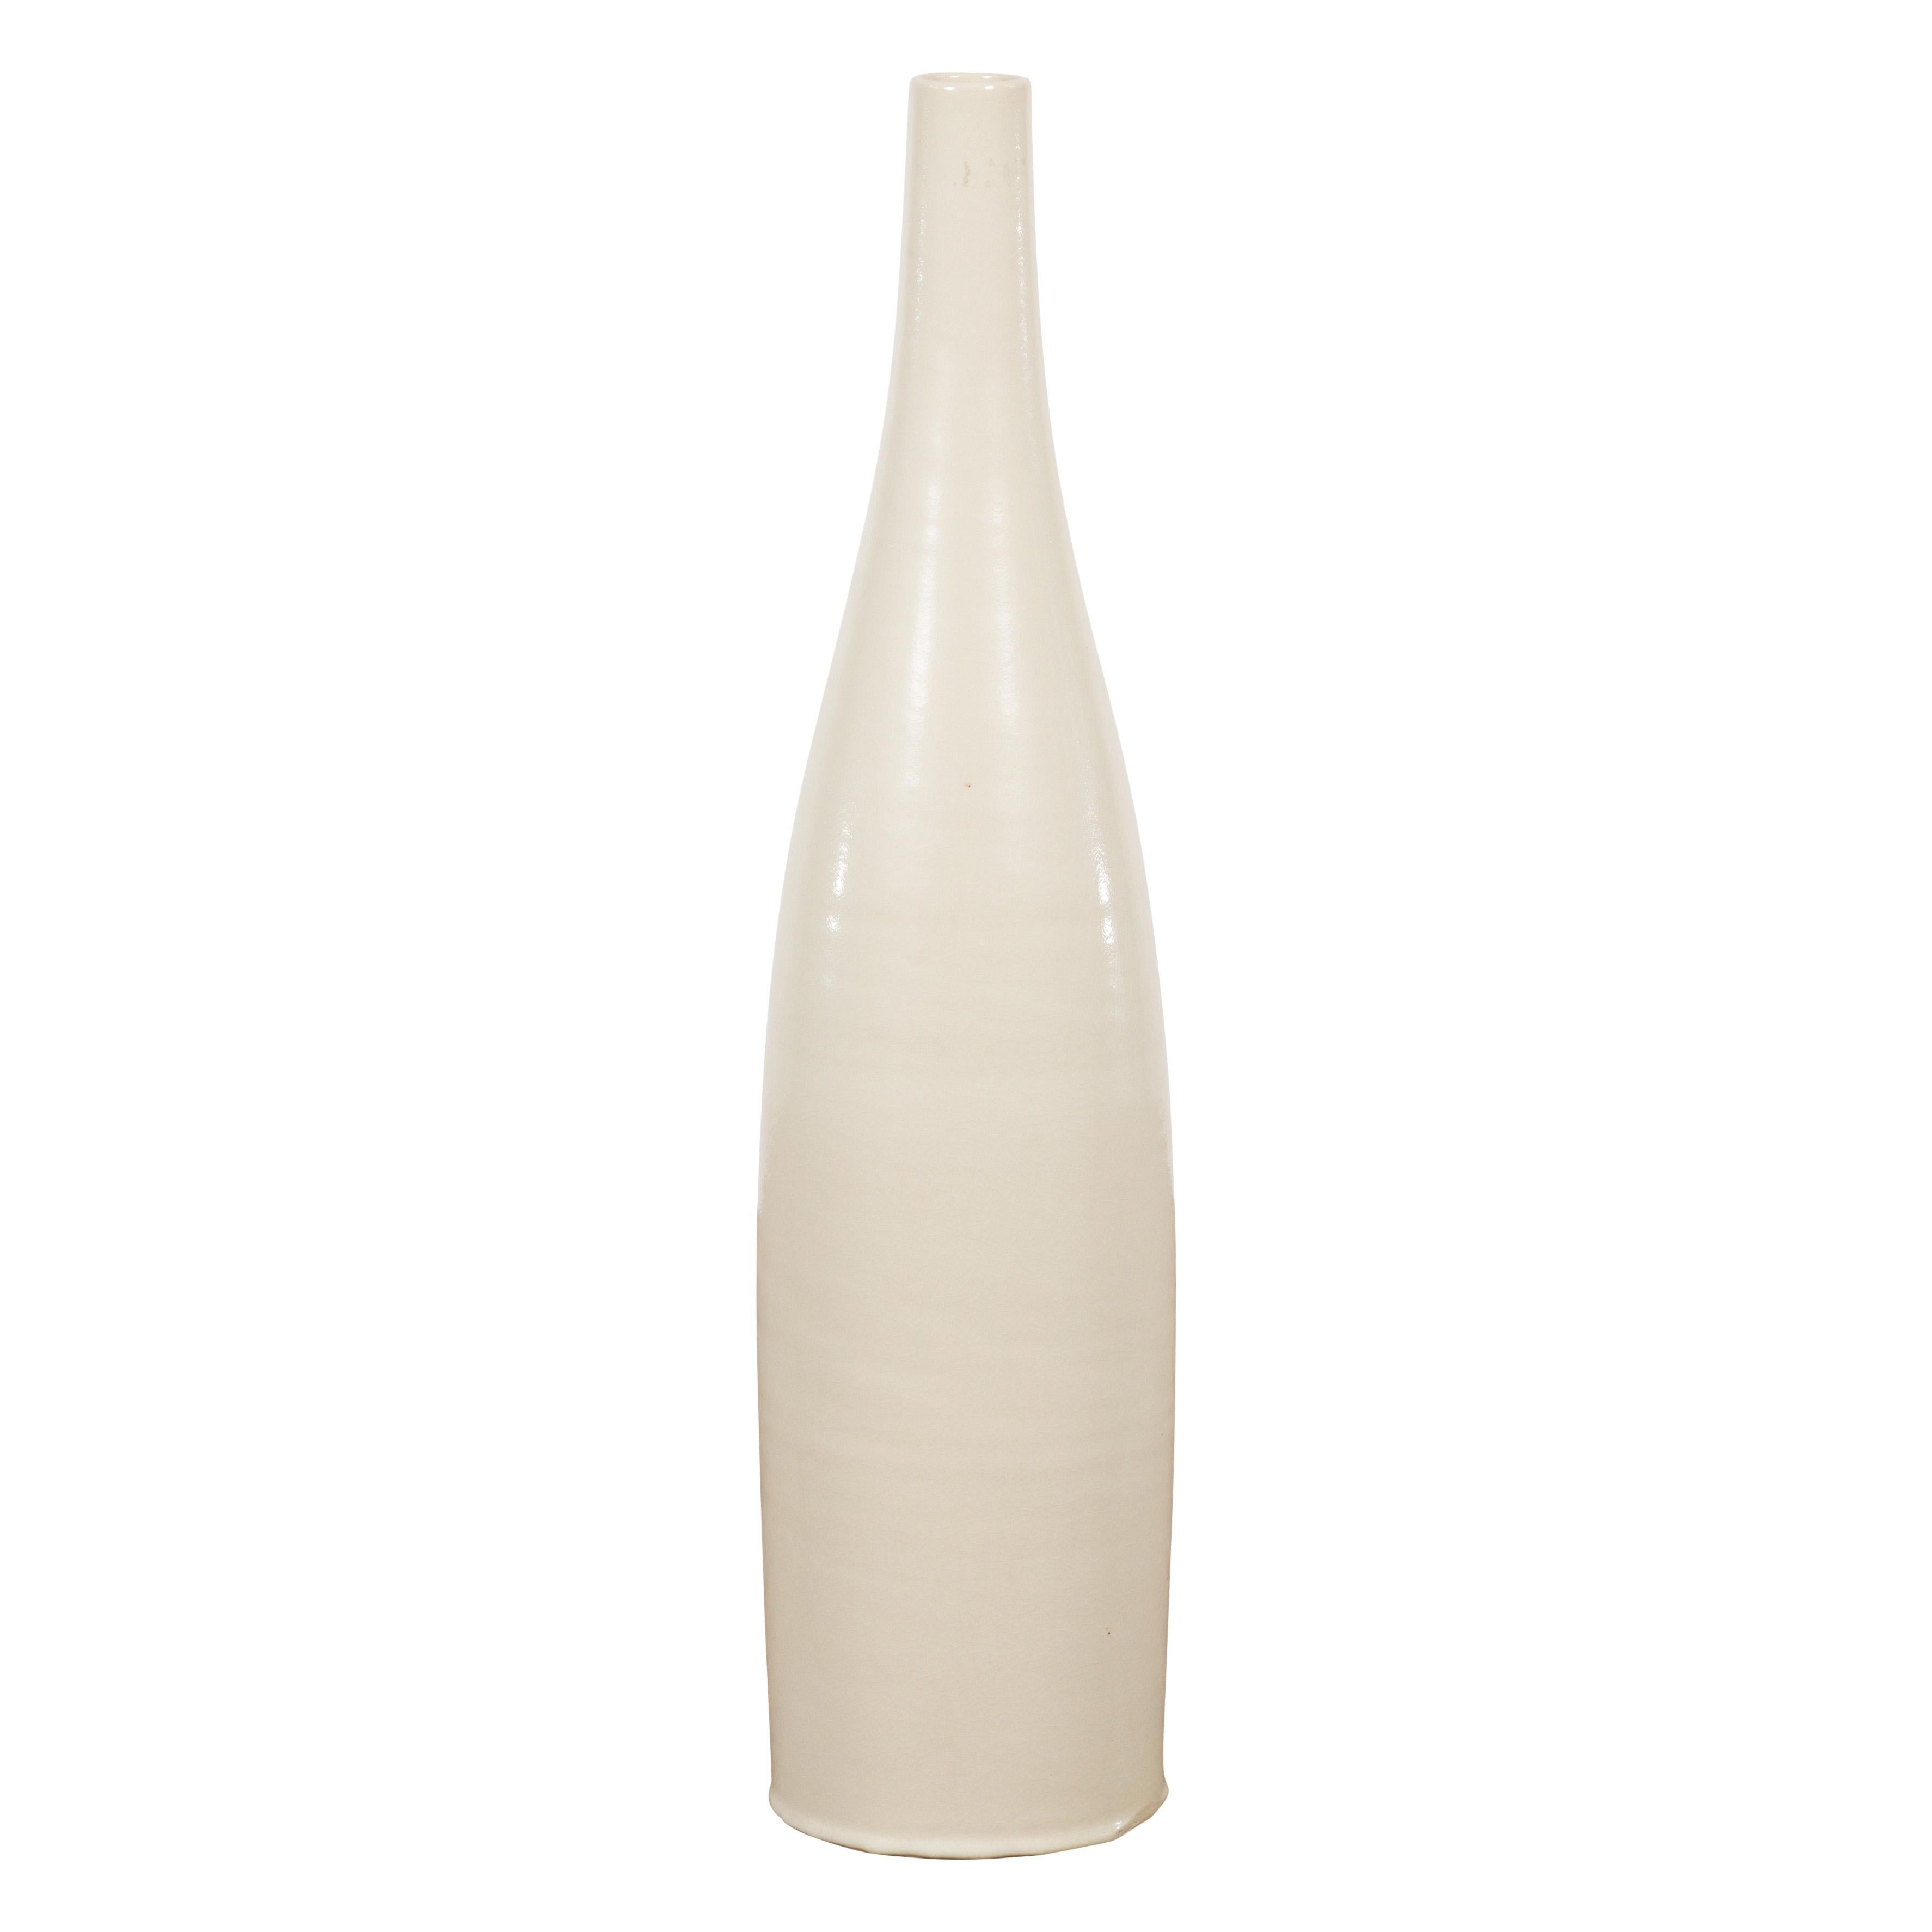 A tall contemporary Prem Collection artisan made vase with cream glaze and slander silhouette. This tall vase is a product of the Prem Collection. Its slender silhouette, capturing grace and sophistication, is accentuated by a creamy, neutral glaze